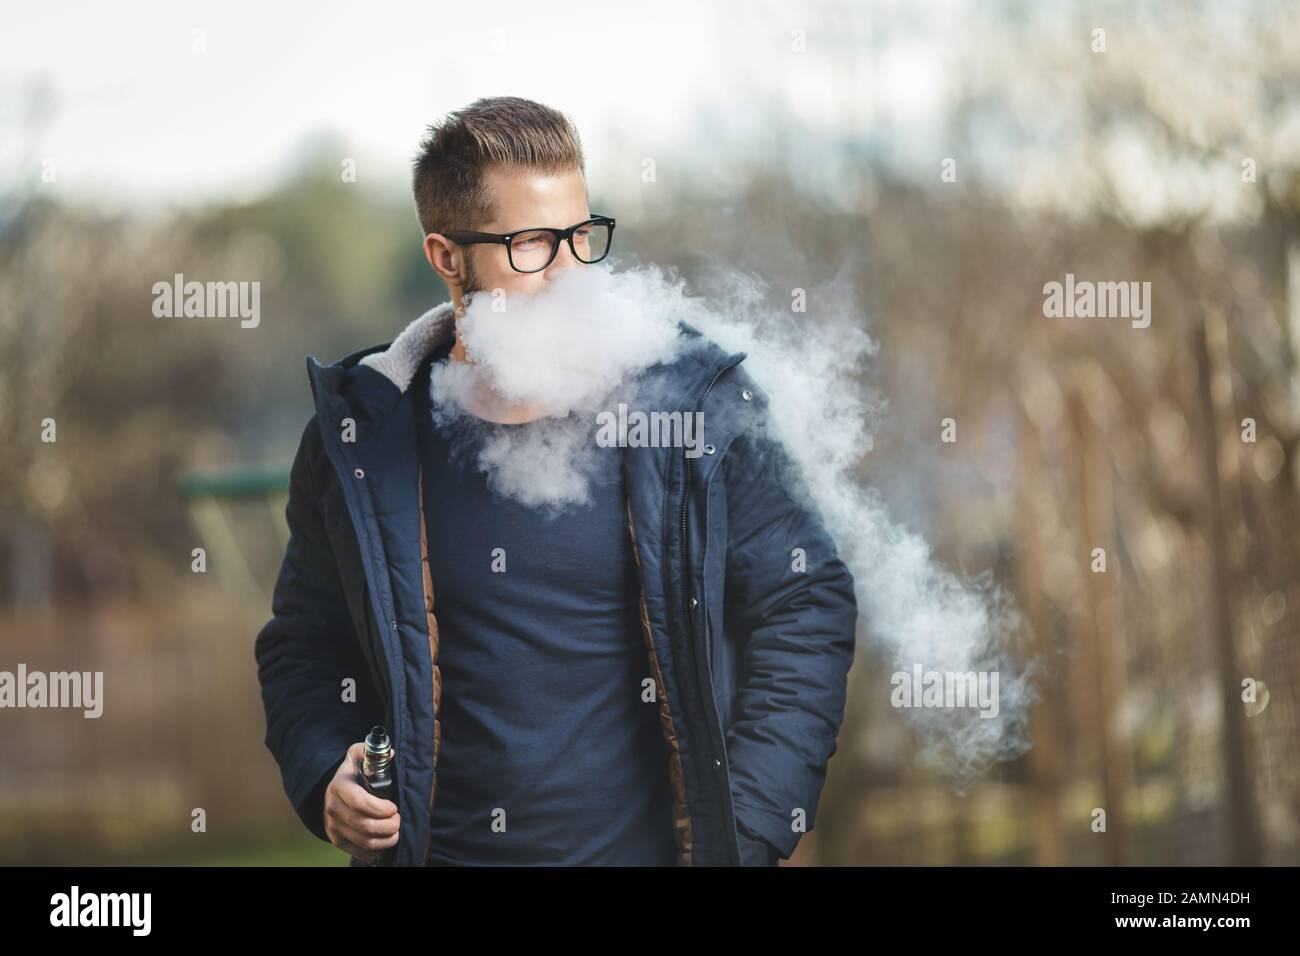 Vaping flavored e-liquid from an electronic cigarette Stock Photo